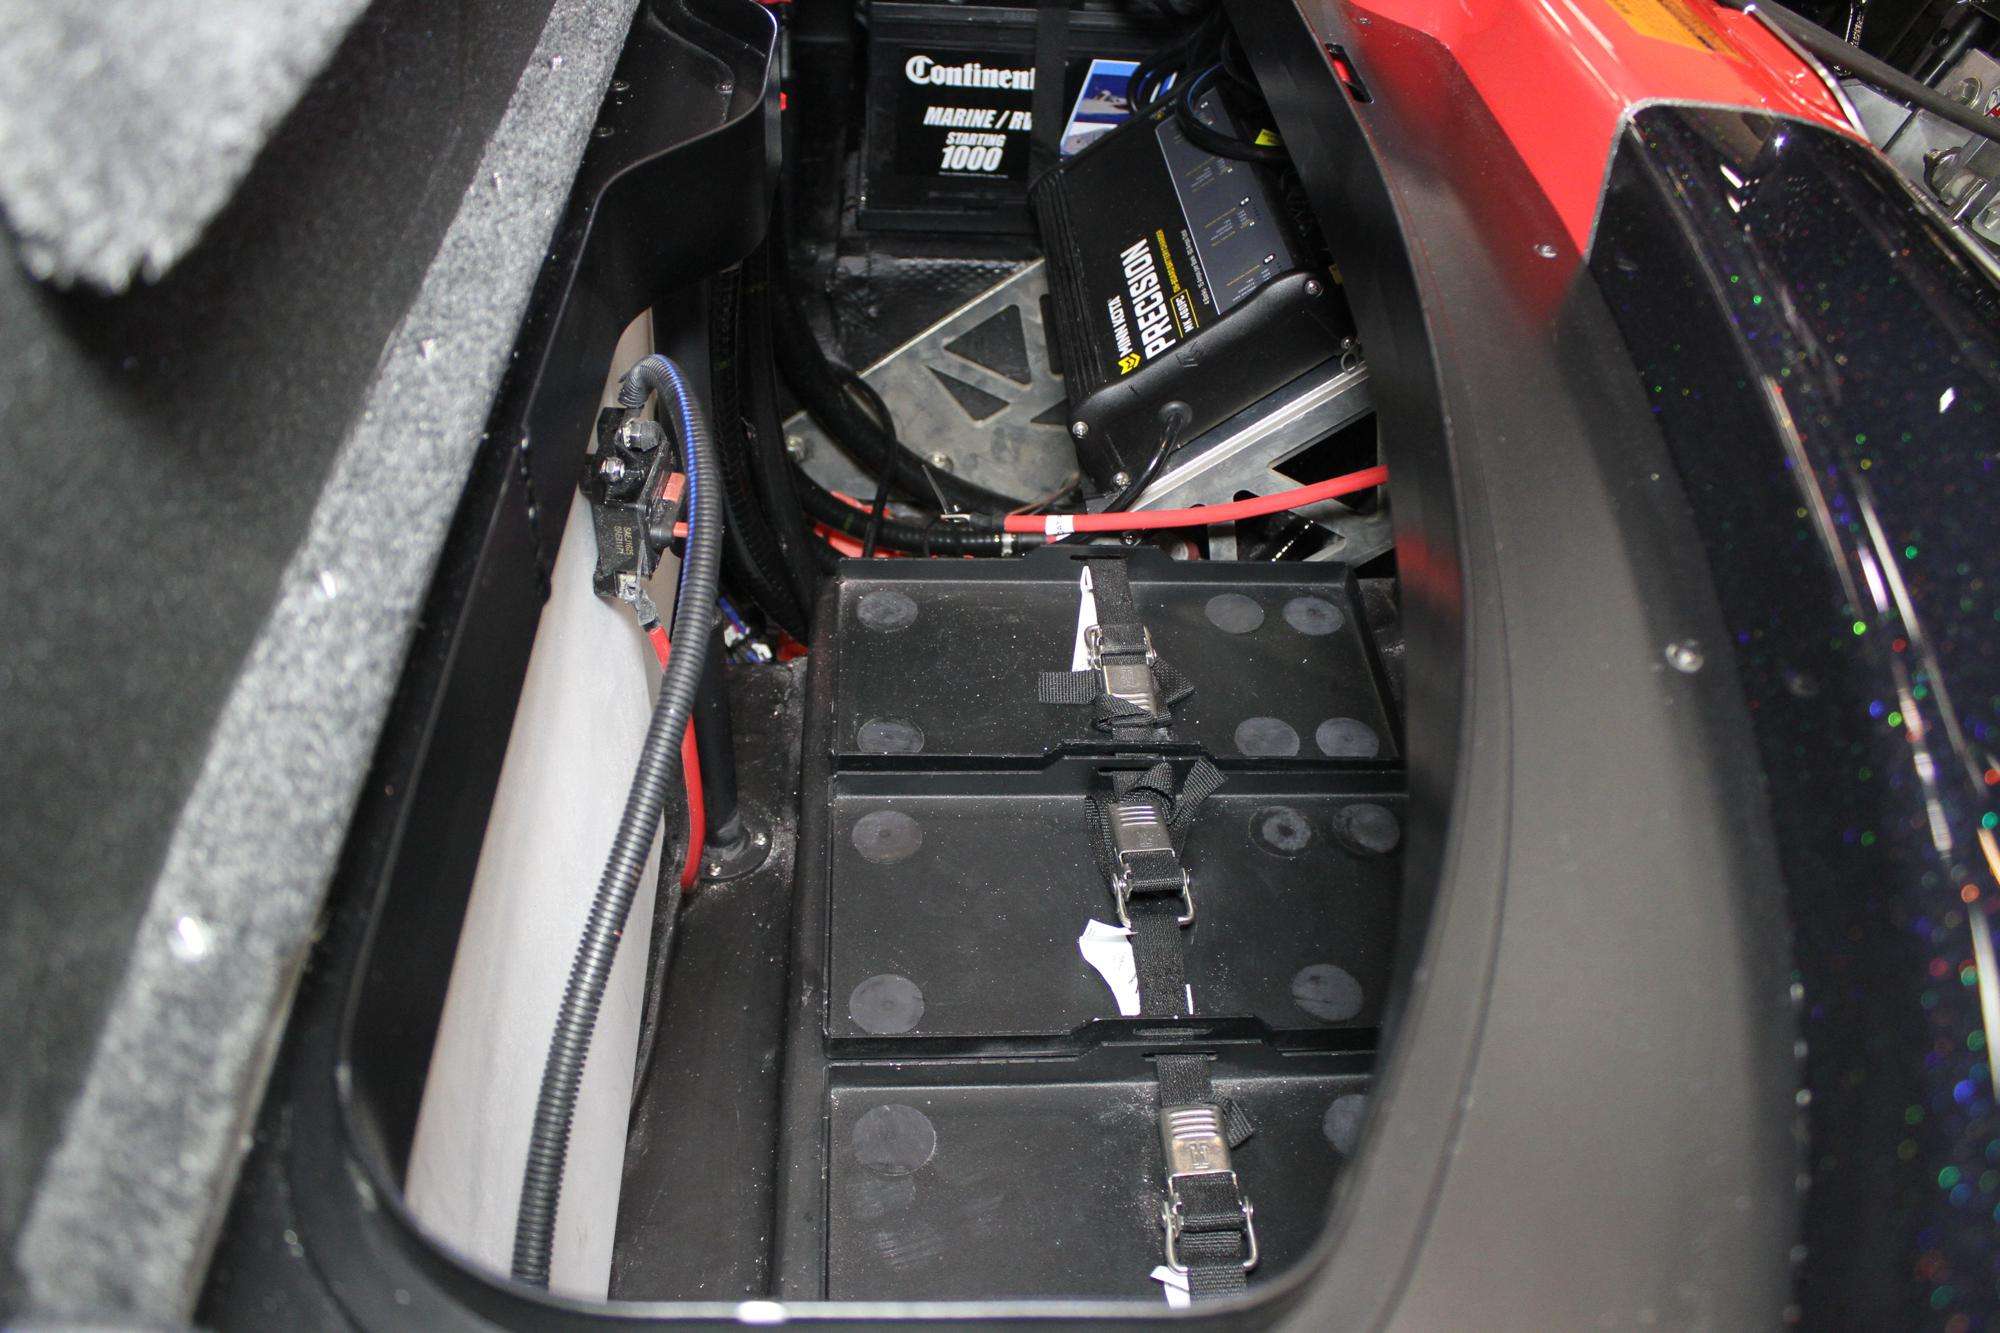 The rigging compartment features raised battery platforms to make it easier to put batteries in the boat.